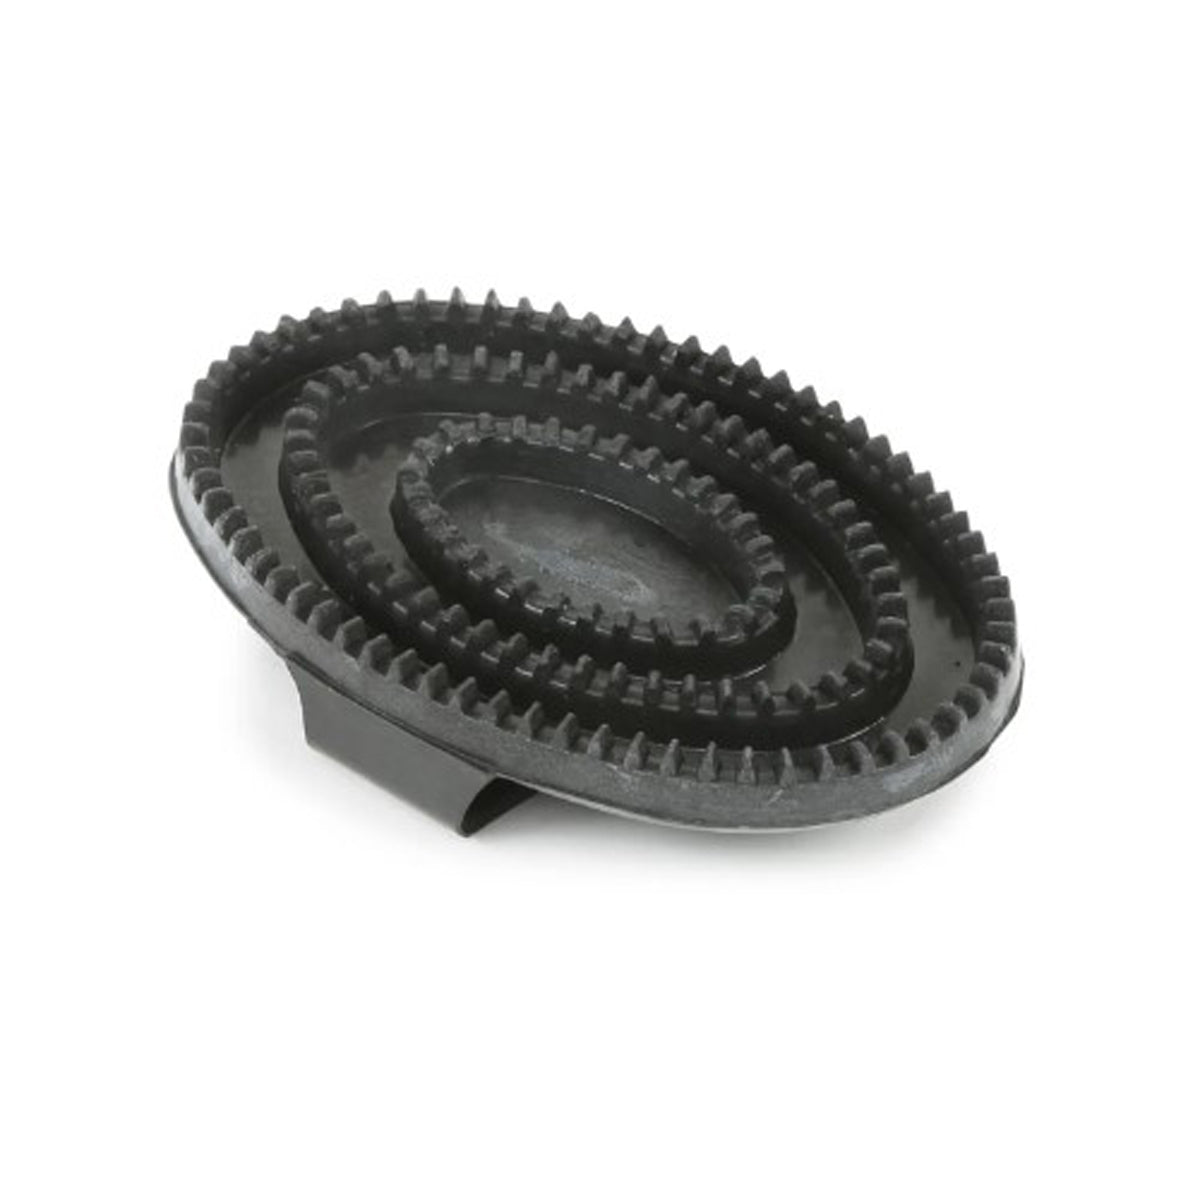 Shires Rubber Curry Comb